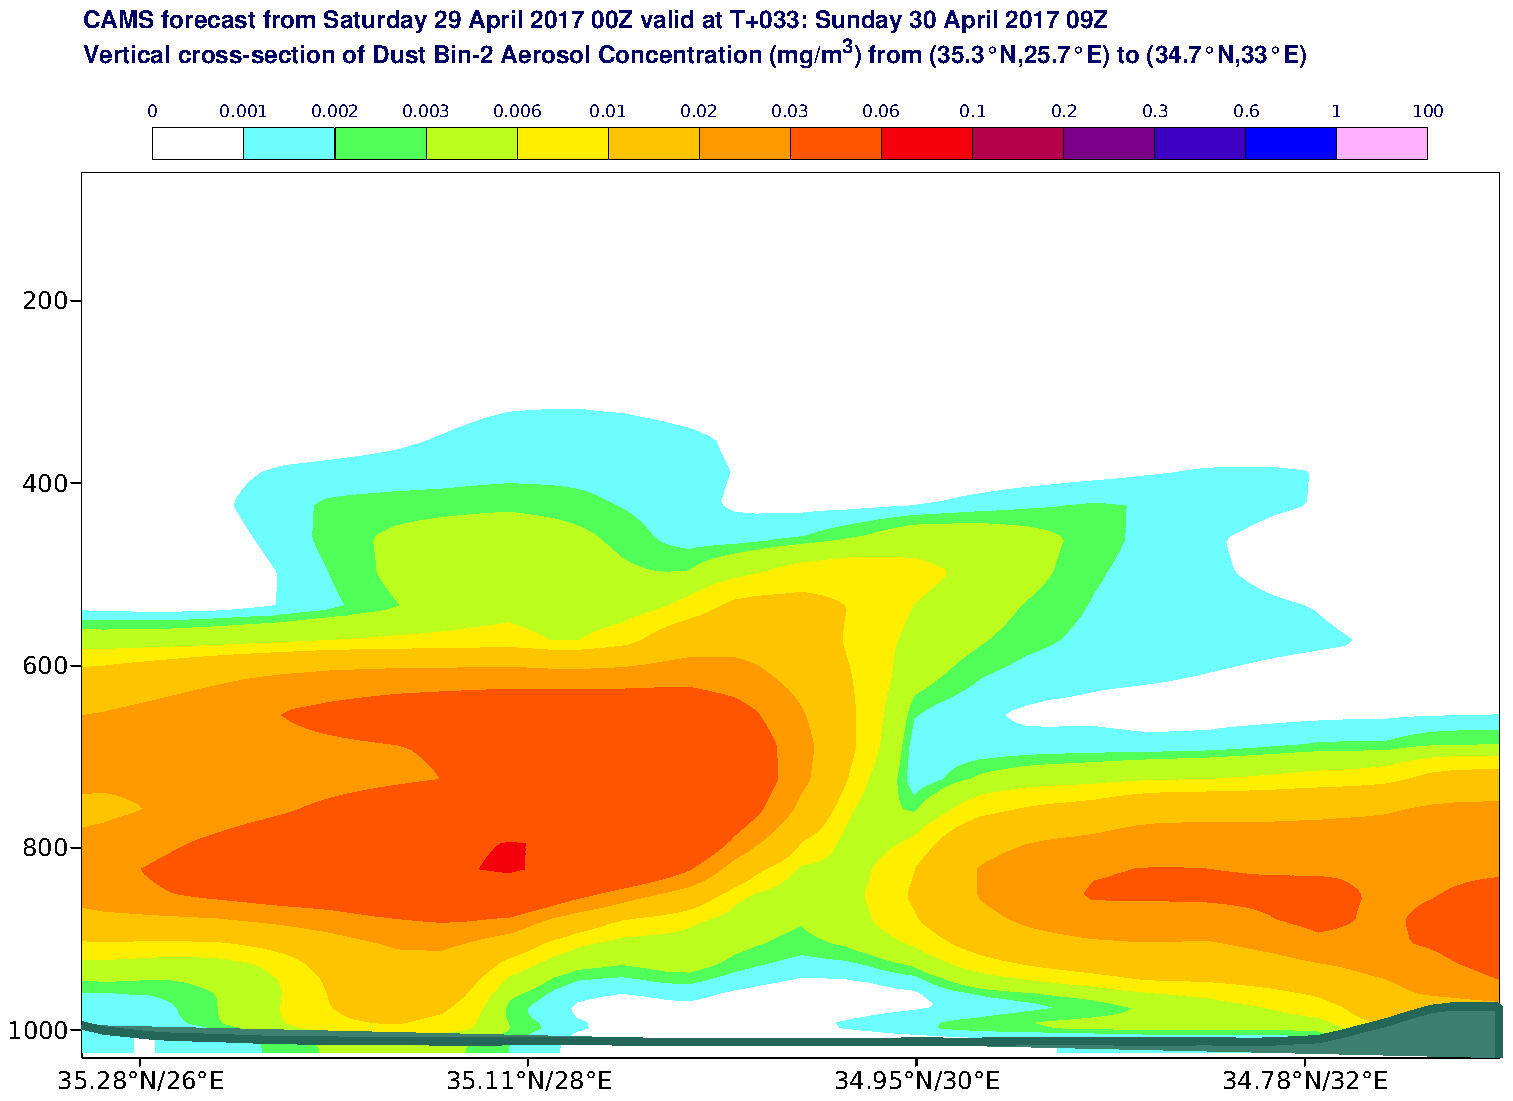 Vertical cross-section of Dust Bin-2 Aerosol Concentration (mg/m3) valid at T33 - 2017-04-30 09:00